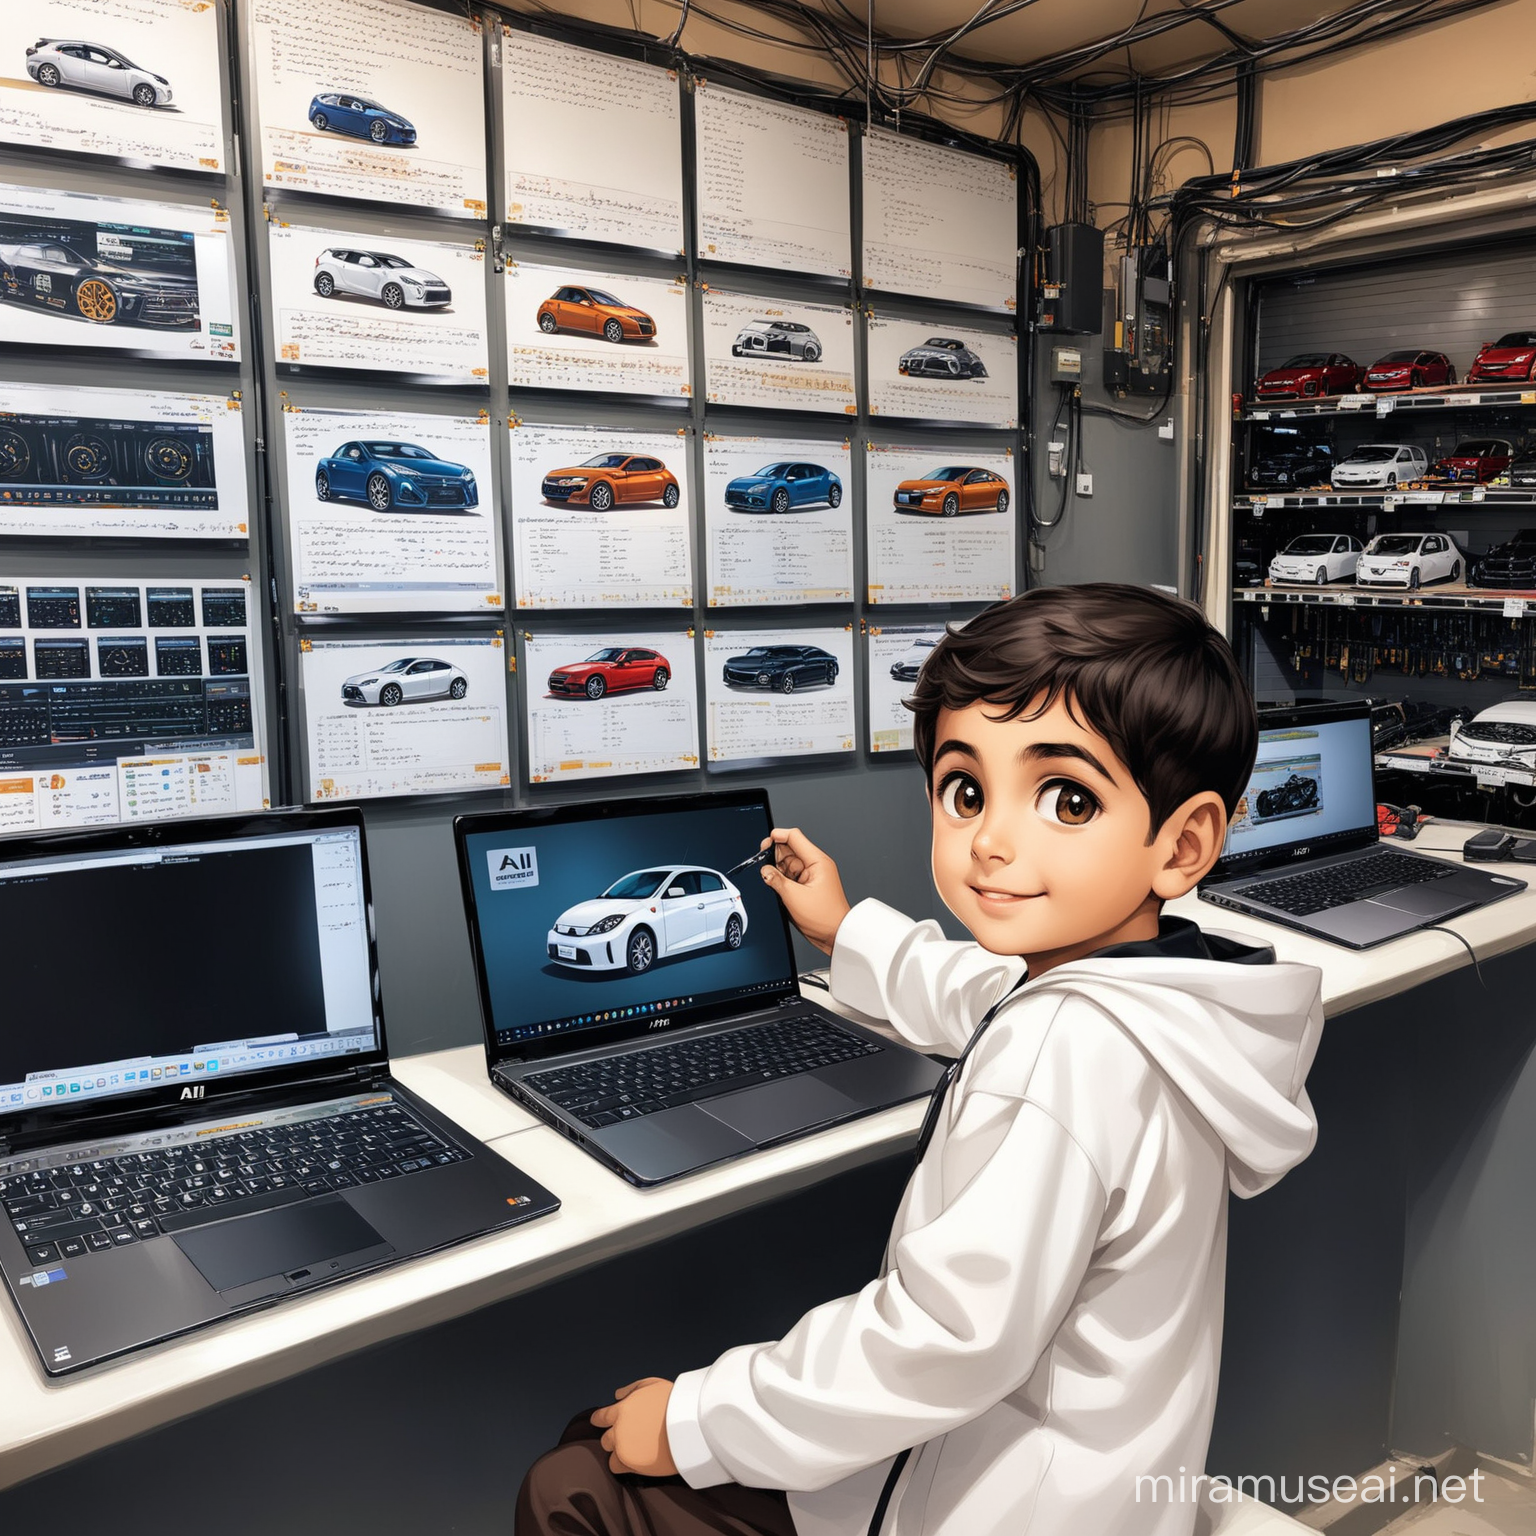 Our language is Persian so when I use quotation(") beginning and end of a phrase it is utf-8 character set so in the result on the image AI must use them.

Ali("علی") is a Persian little boy he is 8 years old, cute, white skin, smiling, high technology car manufacturing engineer.

Samandcr("سمند") is a modern and high technology car manufactured by Iran Khodro brief IKCO("ایران خودرو"), the hood is open, engine is visible.

Ali("علی") is repairing Samandcr by a laptop.

Atmosphere is a super high technology auto repair shop, with some laptops, car tuning devices, cartoon.

On the walls are monitors, few devices, a monitor screen on the wall showing the differential of a high technology car.

Clothes of Ali("علی") is the clothes of an engineer which is full of Persian designs.